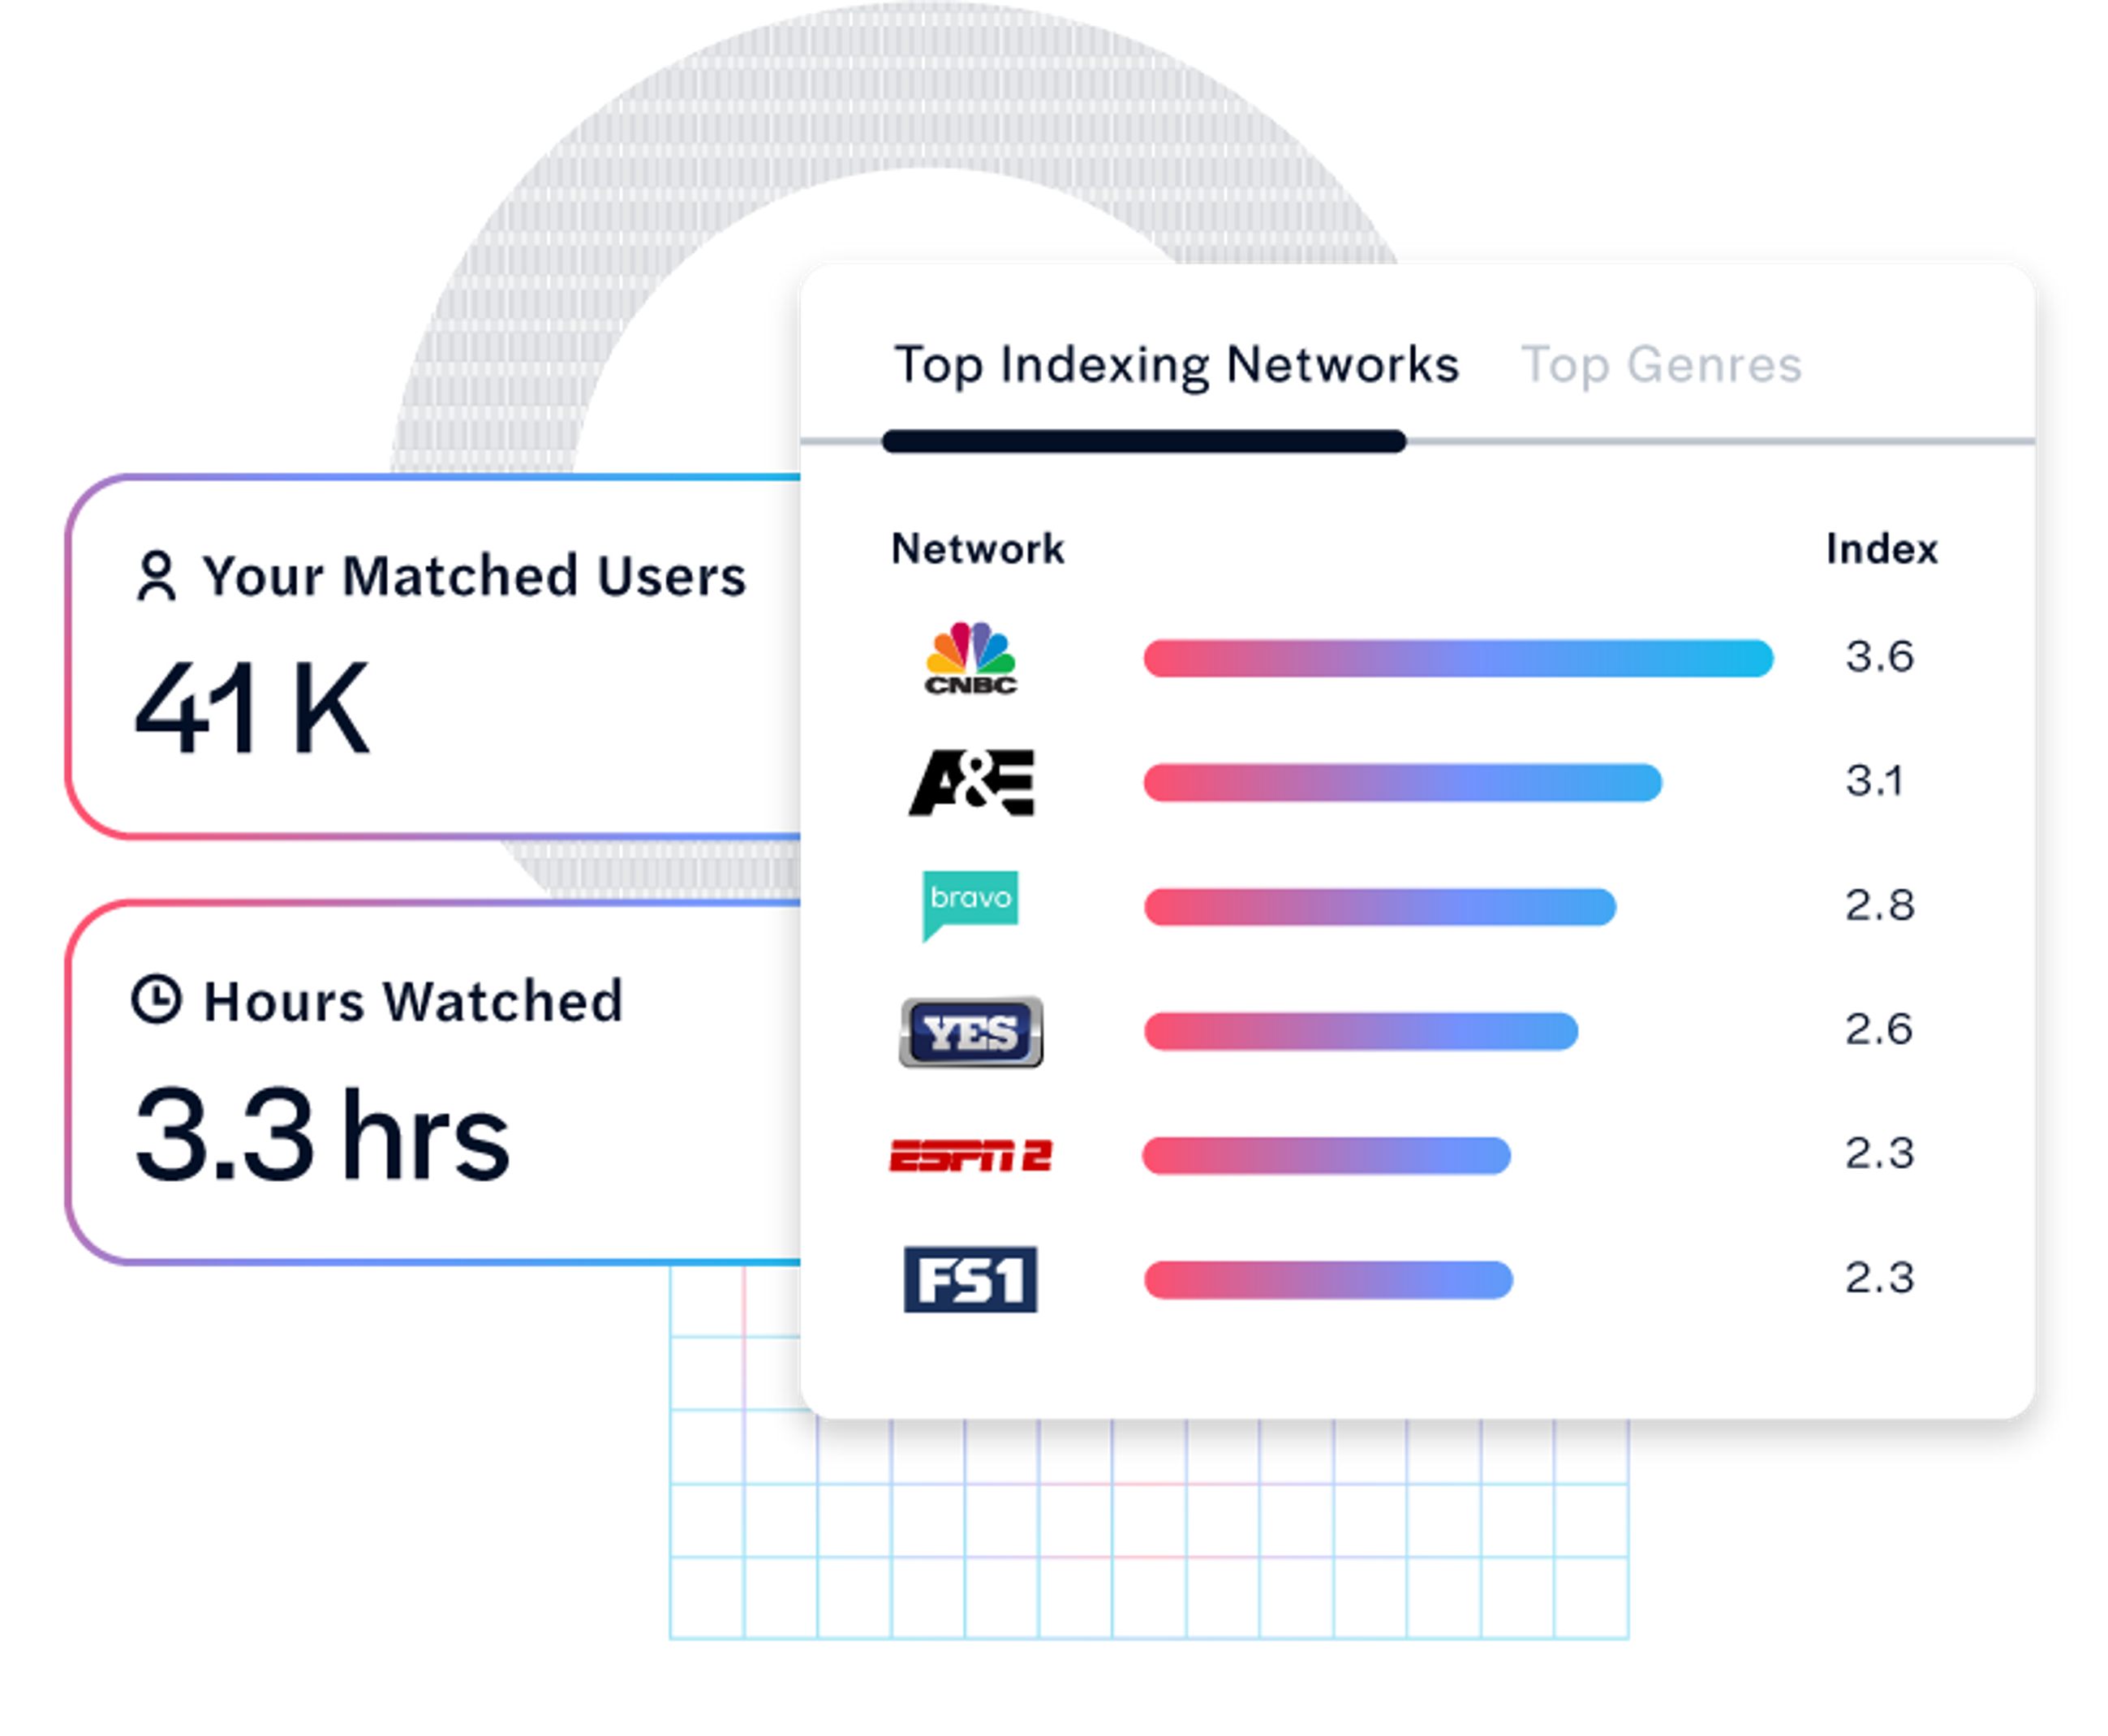 Top indexing networks insights from Simulmedia